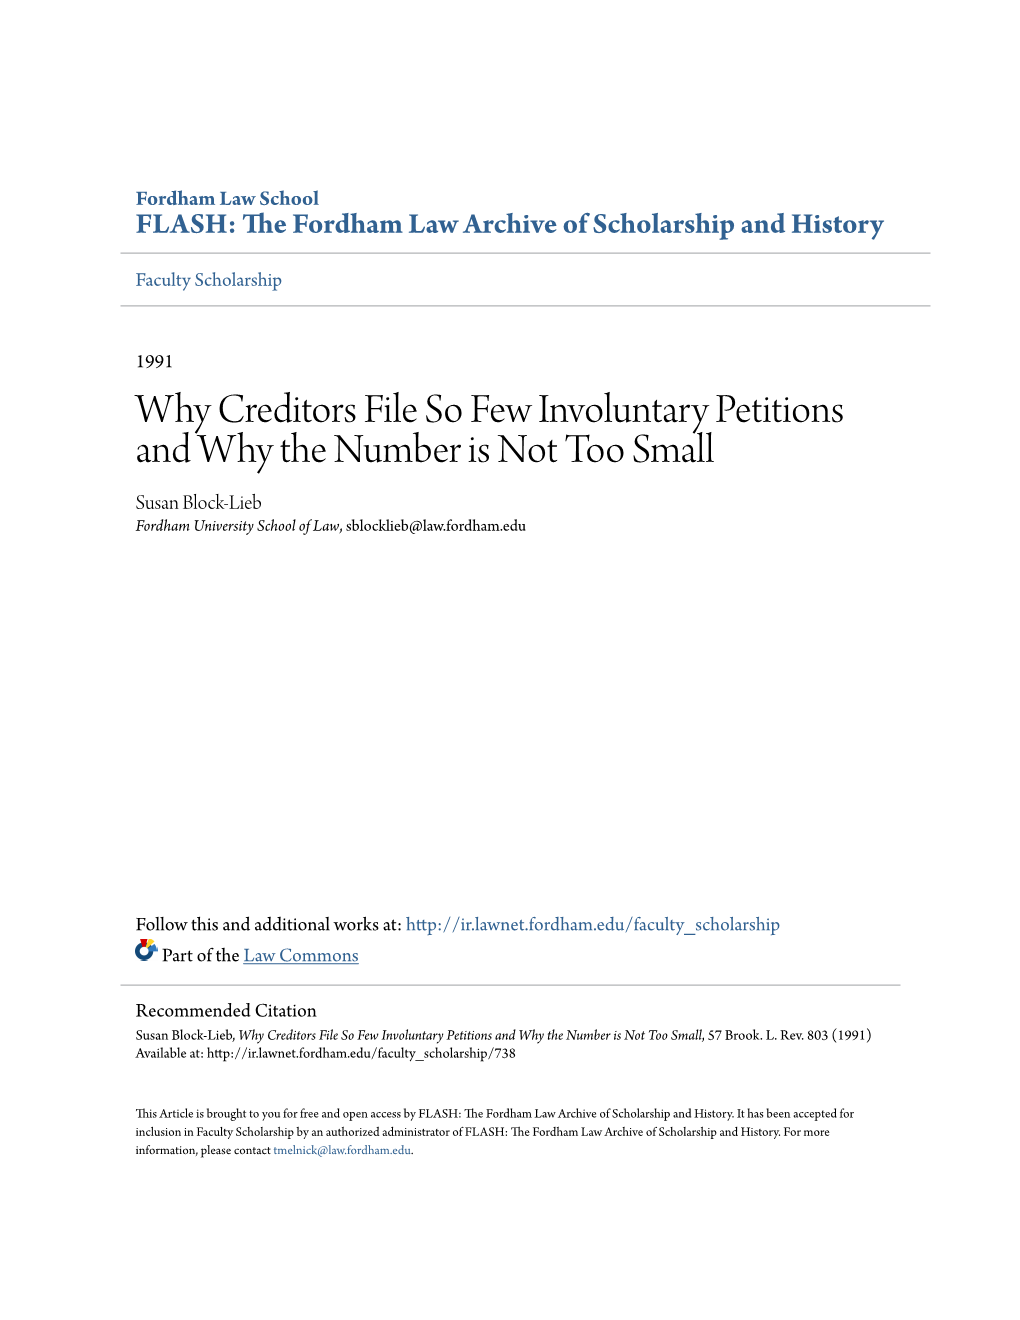 Why Creditors File So Few Involuntary Petitions and Why the Number Is Not Too Small Susan Block-Lieb Fordham University School of Law, Sblocklieb@Law.Fordham.Edu